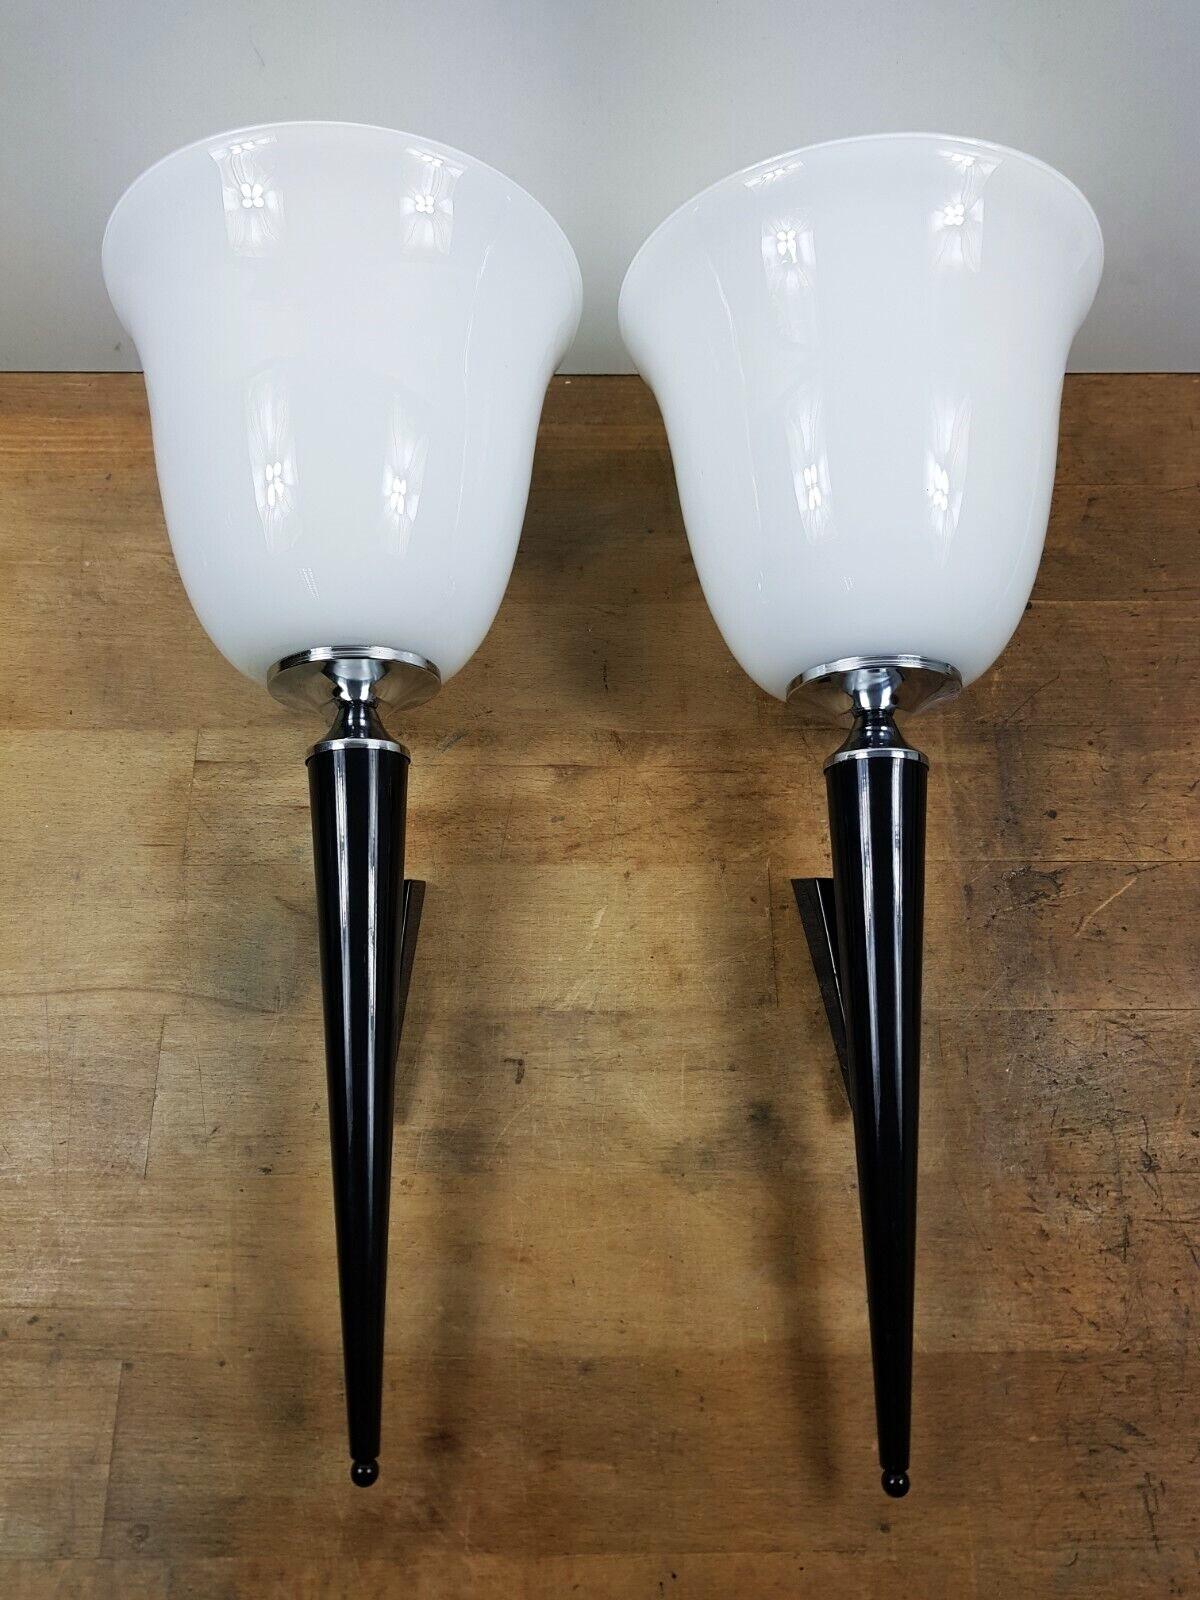 A pair of tall Art Deco torchiere wall lights, France 1950s. Conical base of black lackered metall parcel chrome with a large opaline shade.
Each sconce takes one E27 screw light bulb up to 60watt. LED bulbs can also be used.
Dimensions :
Height: